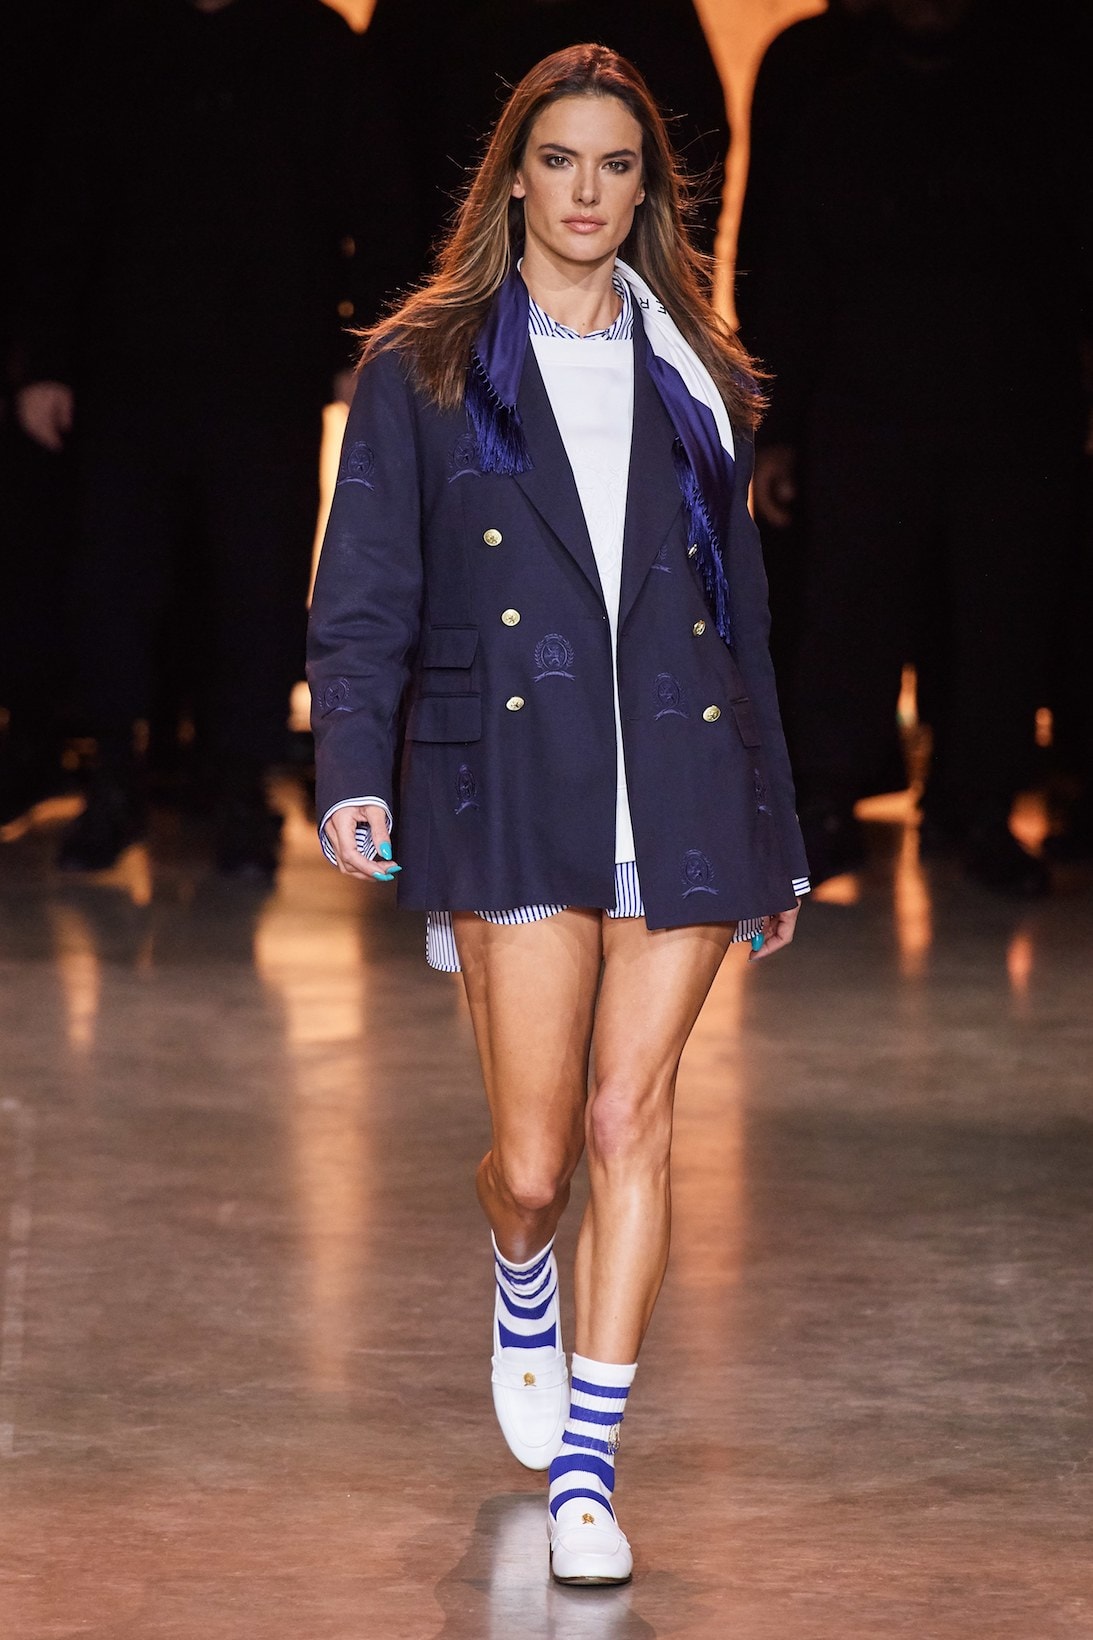 tommy hilfiger tommynow parris goebel london fashion week spring summer collection naomi campbell img models